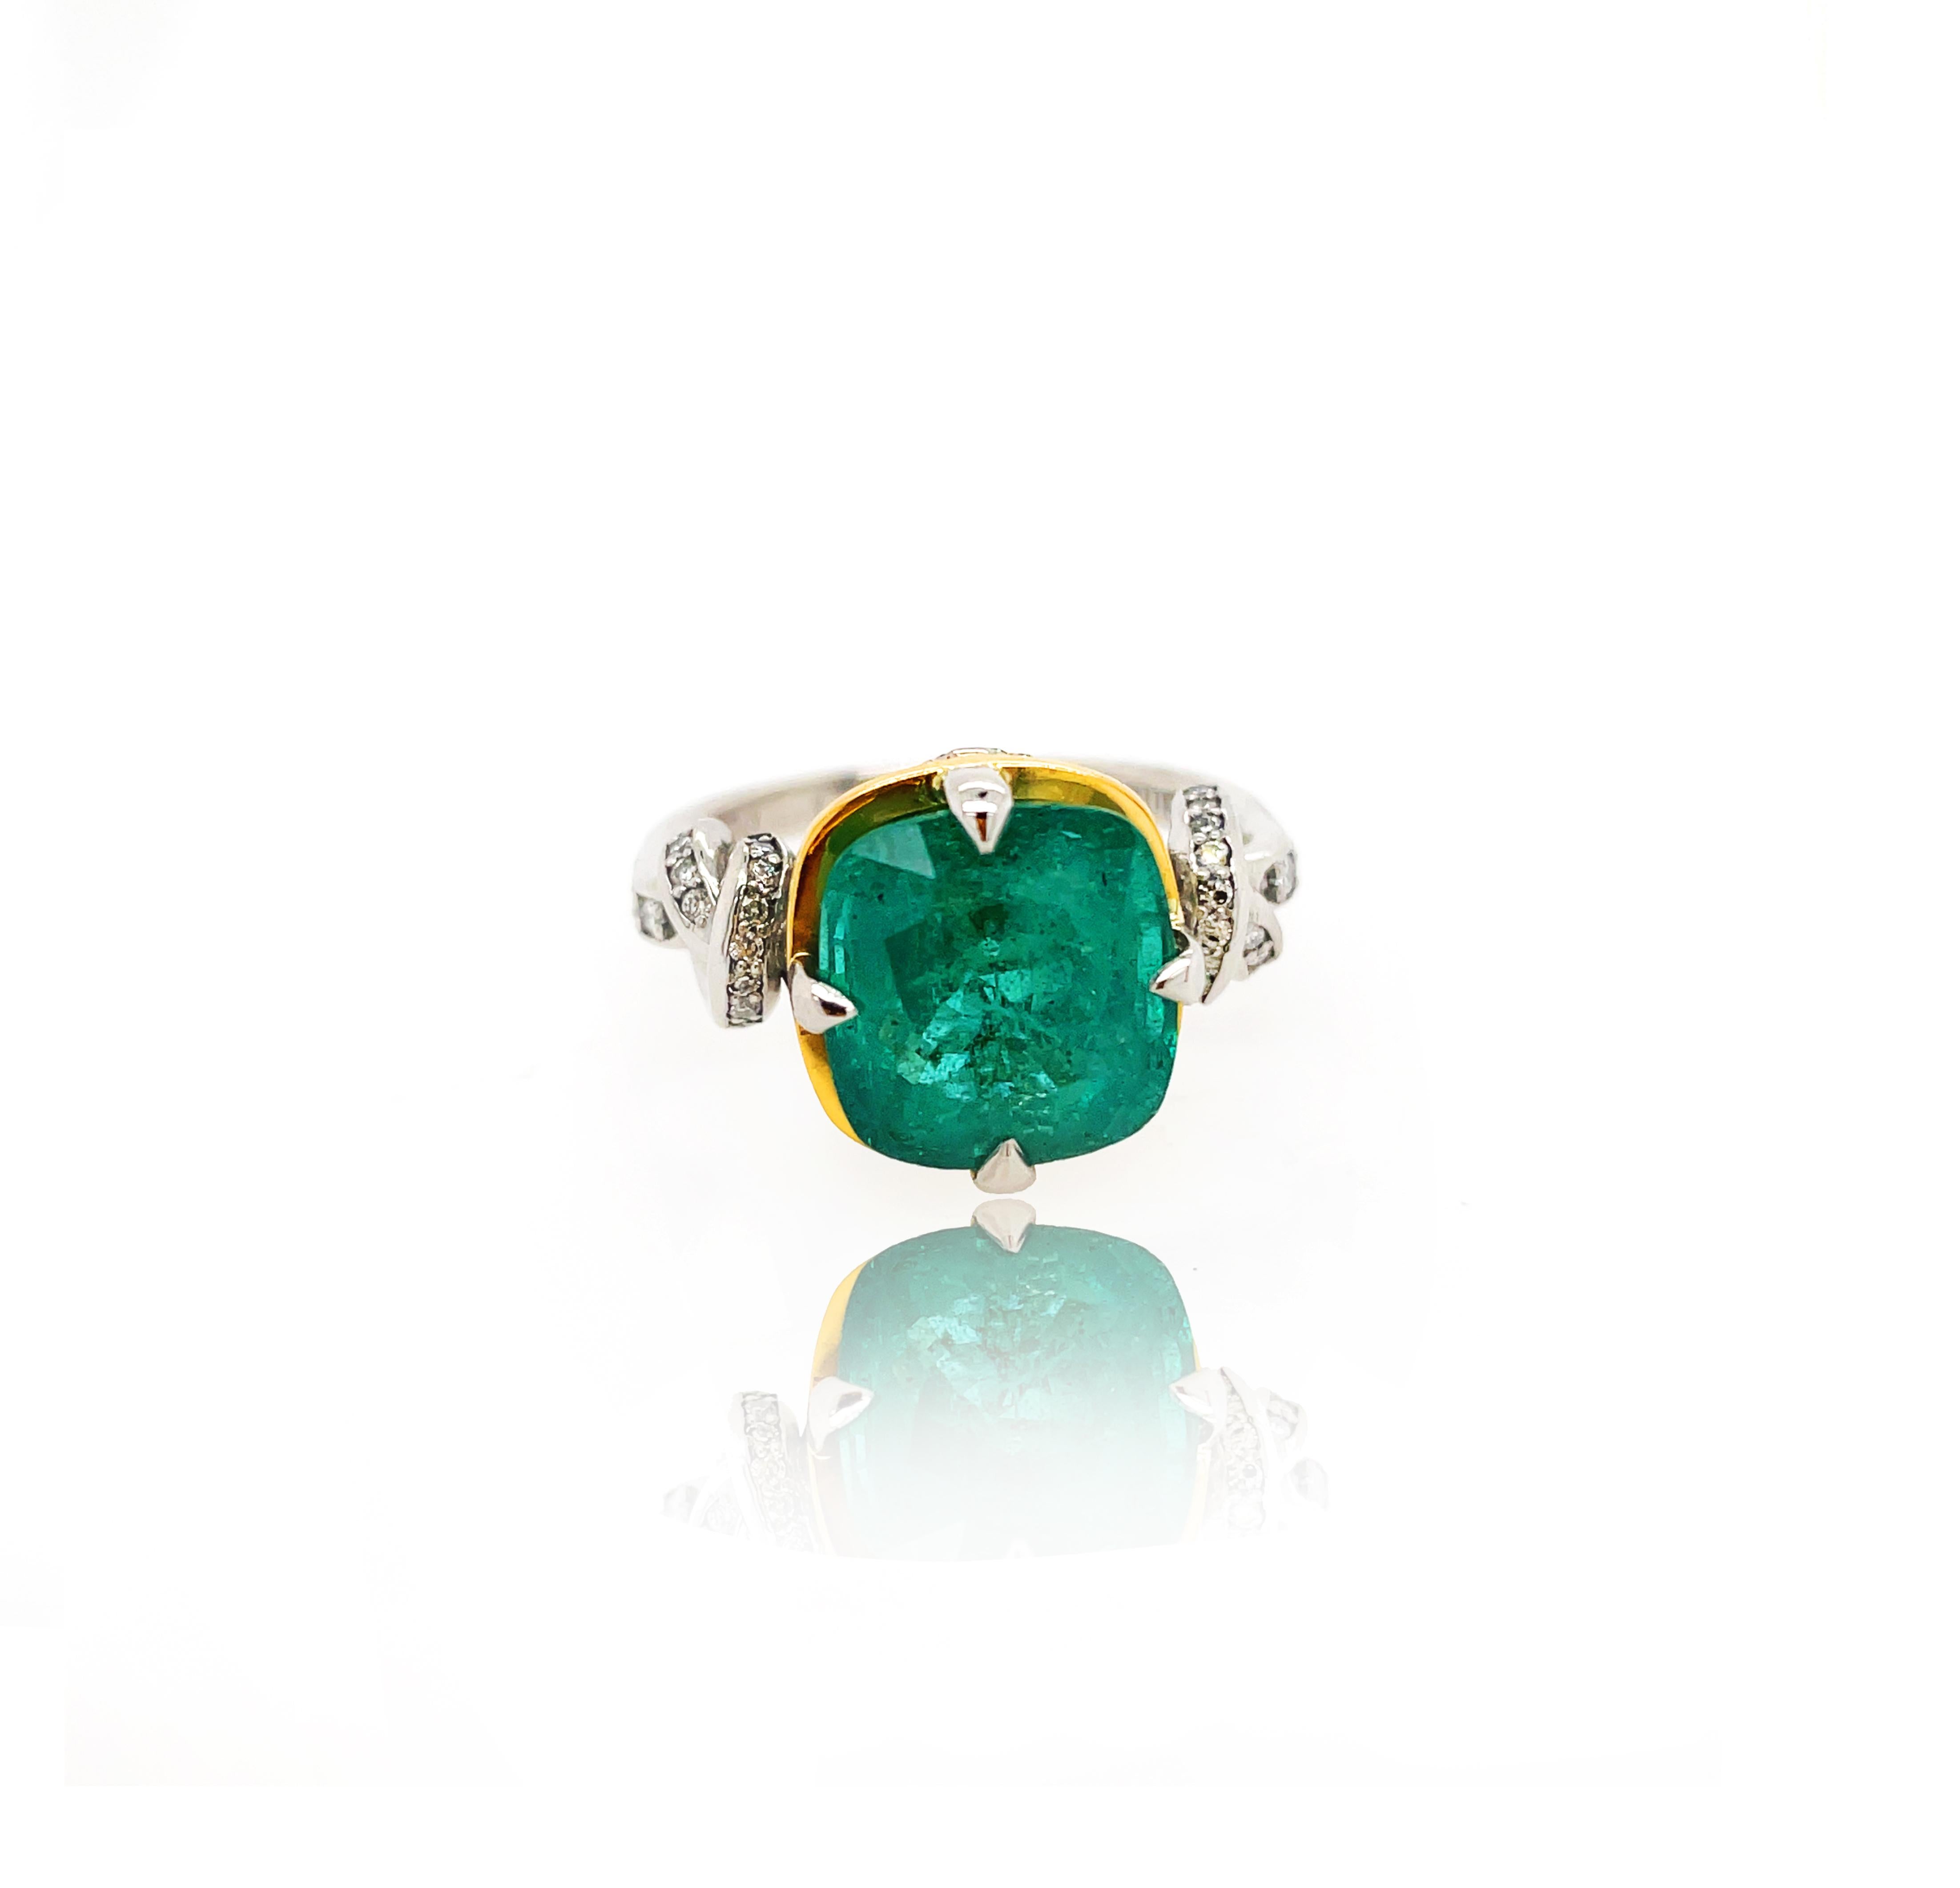 For Sale:  4.96ct Natural Cushion Cut Emerald and Diamond Ring in platinum and 22k gold 5